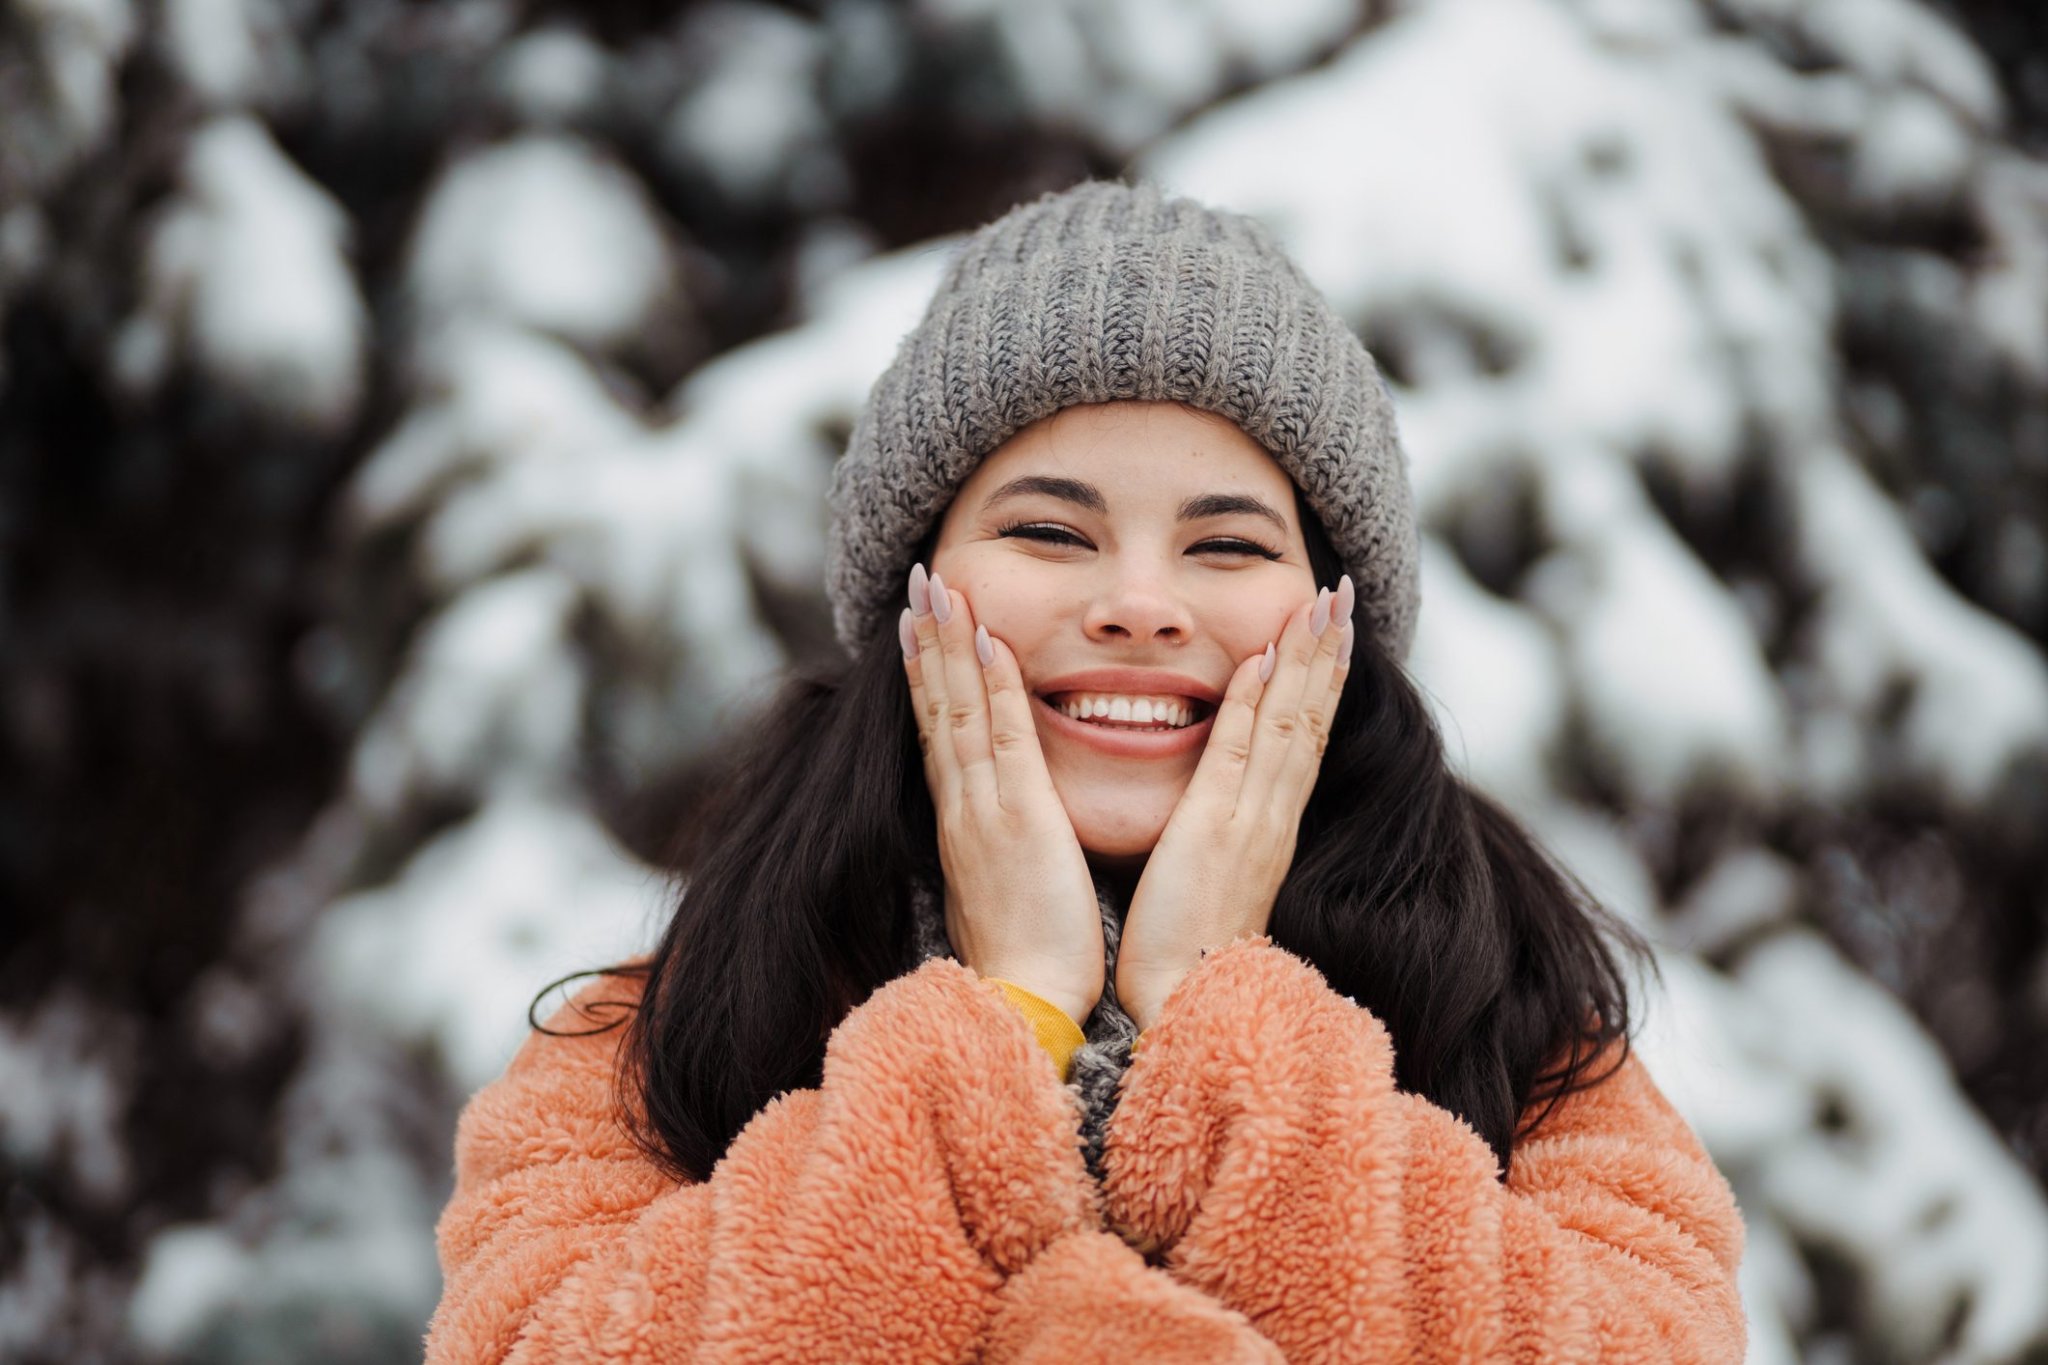 9 Genius Homemade Face Mask Ingredients for “Winter Skin Syndrome”